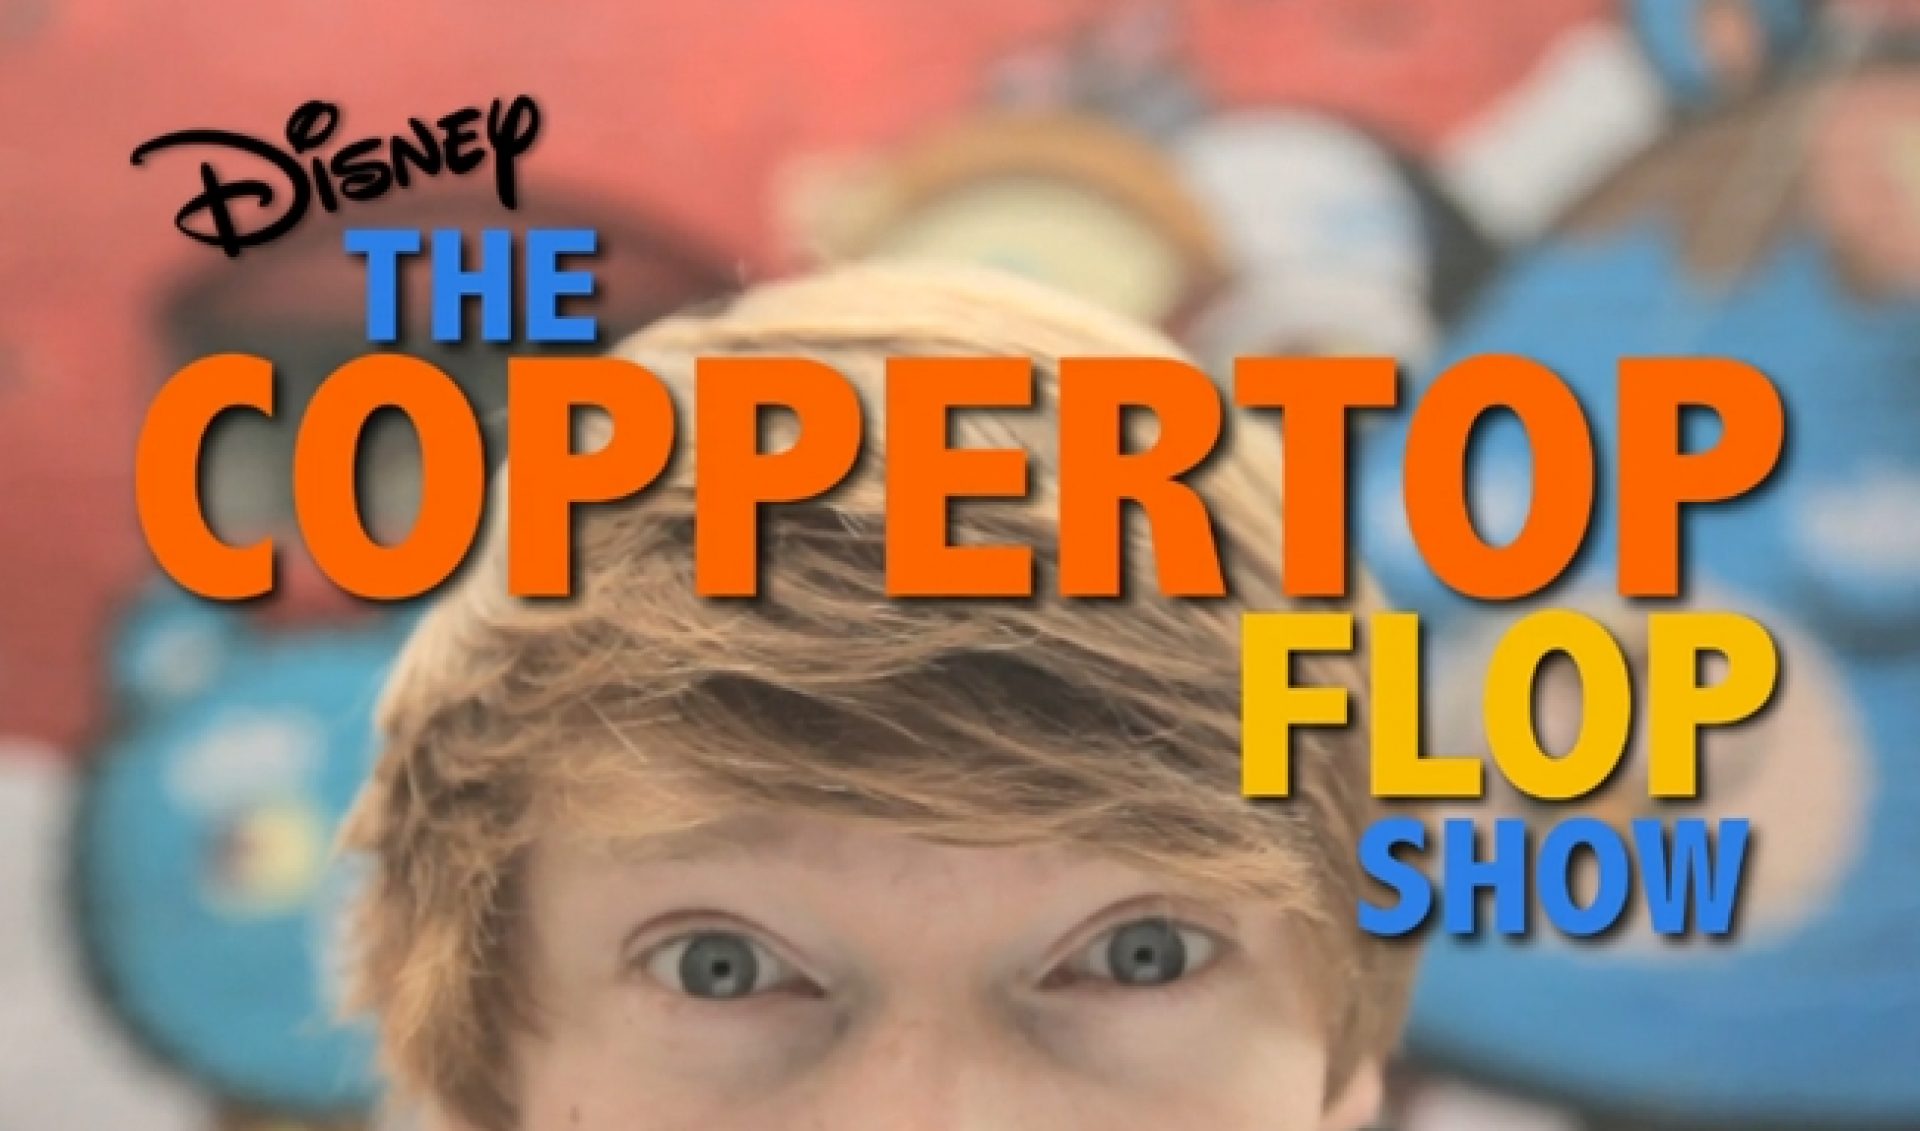 Disney Channel Goes Ginger With ‘The Coppertop Flow Show’